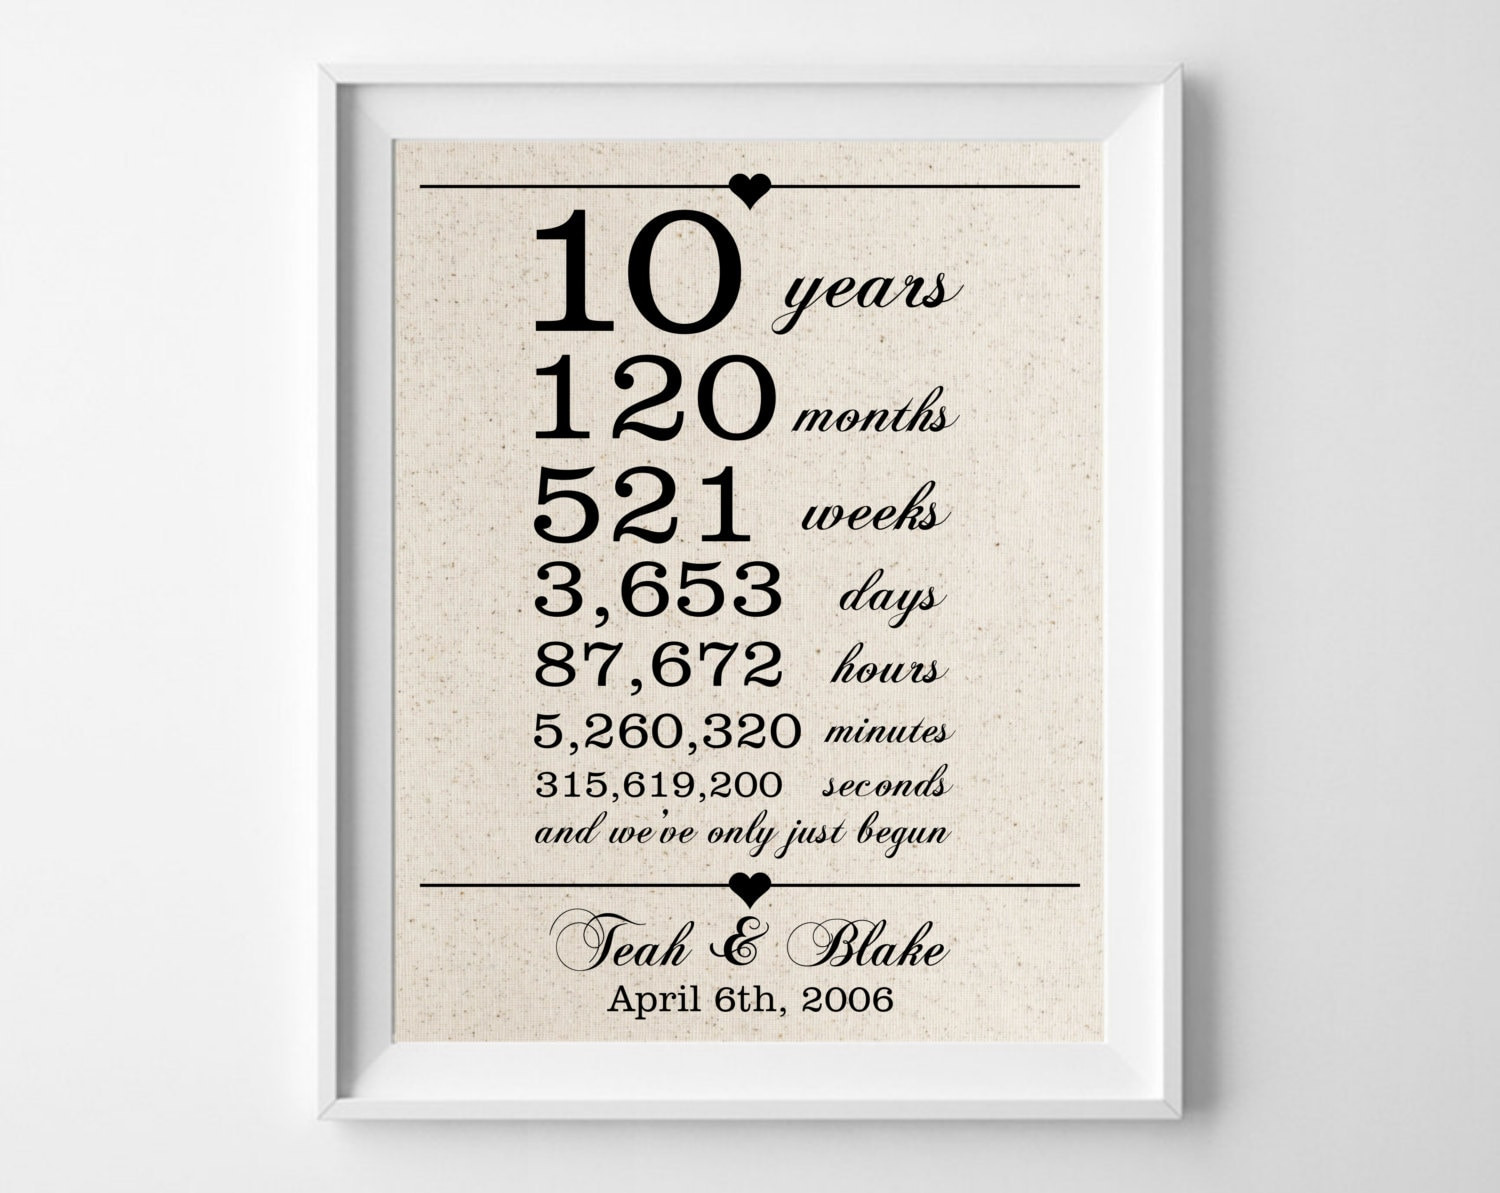 10 Year Anniversary Gift Ideas For Husband
 Top 20 10 Year Anniversary Gift Ideas for Husband – Home